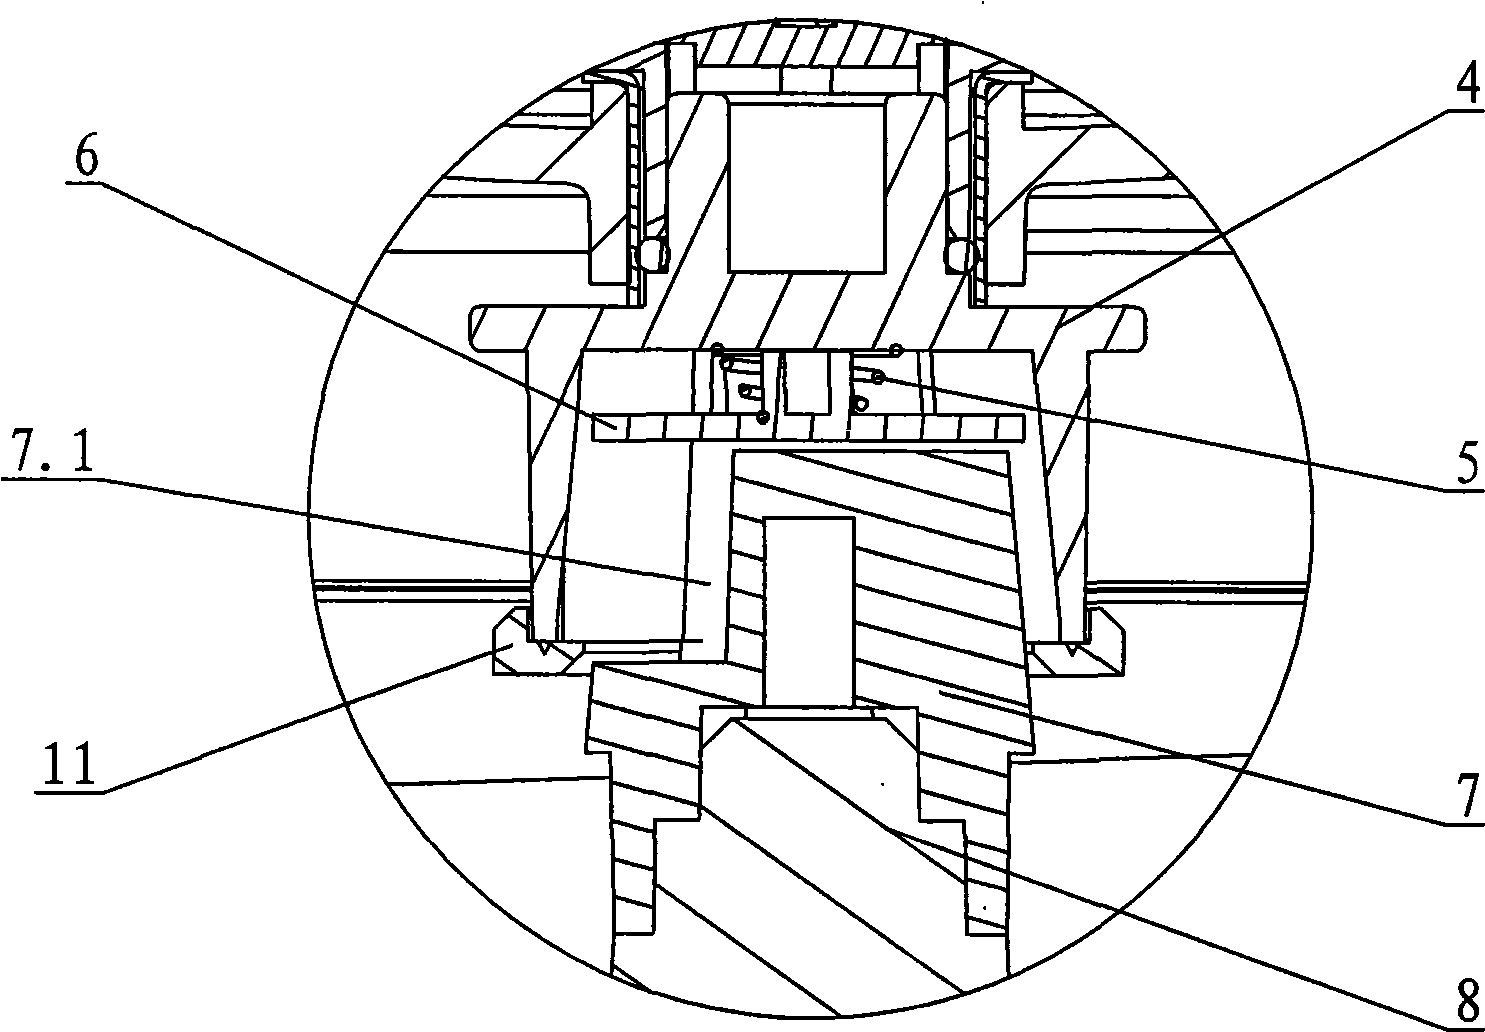 A cutter linkage structure of a mixing cup